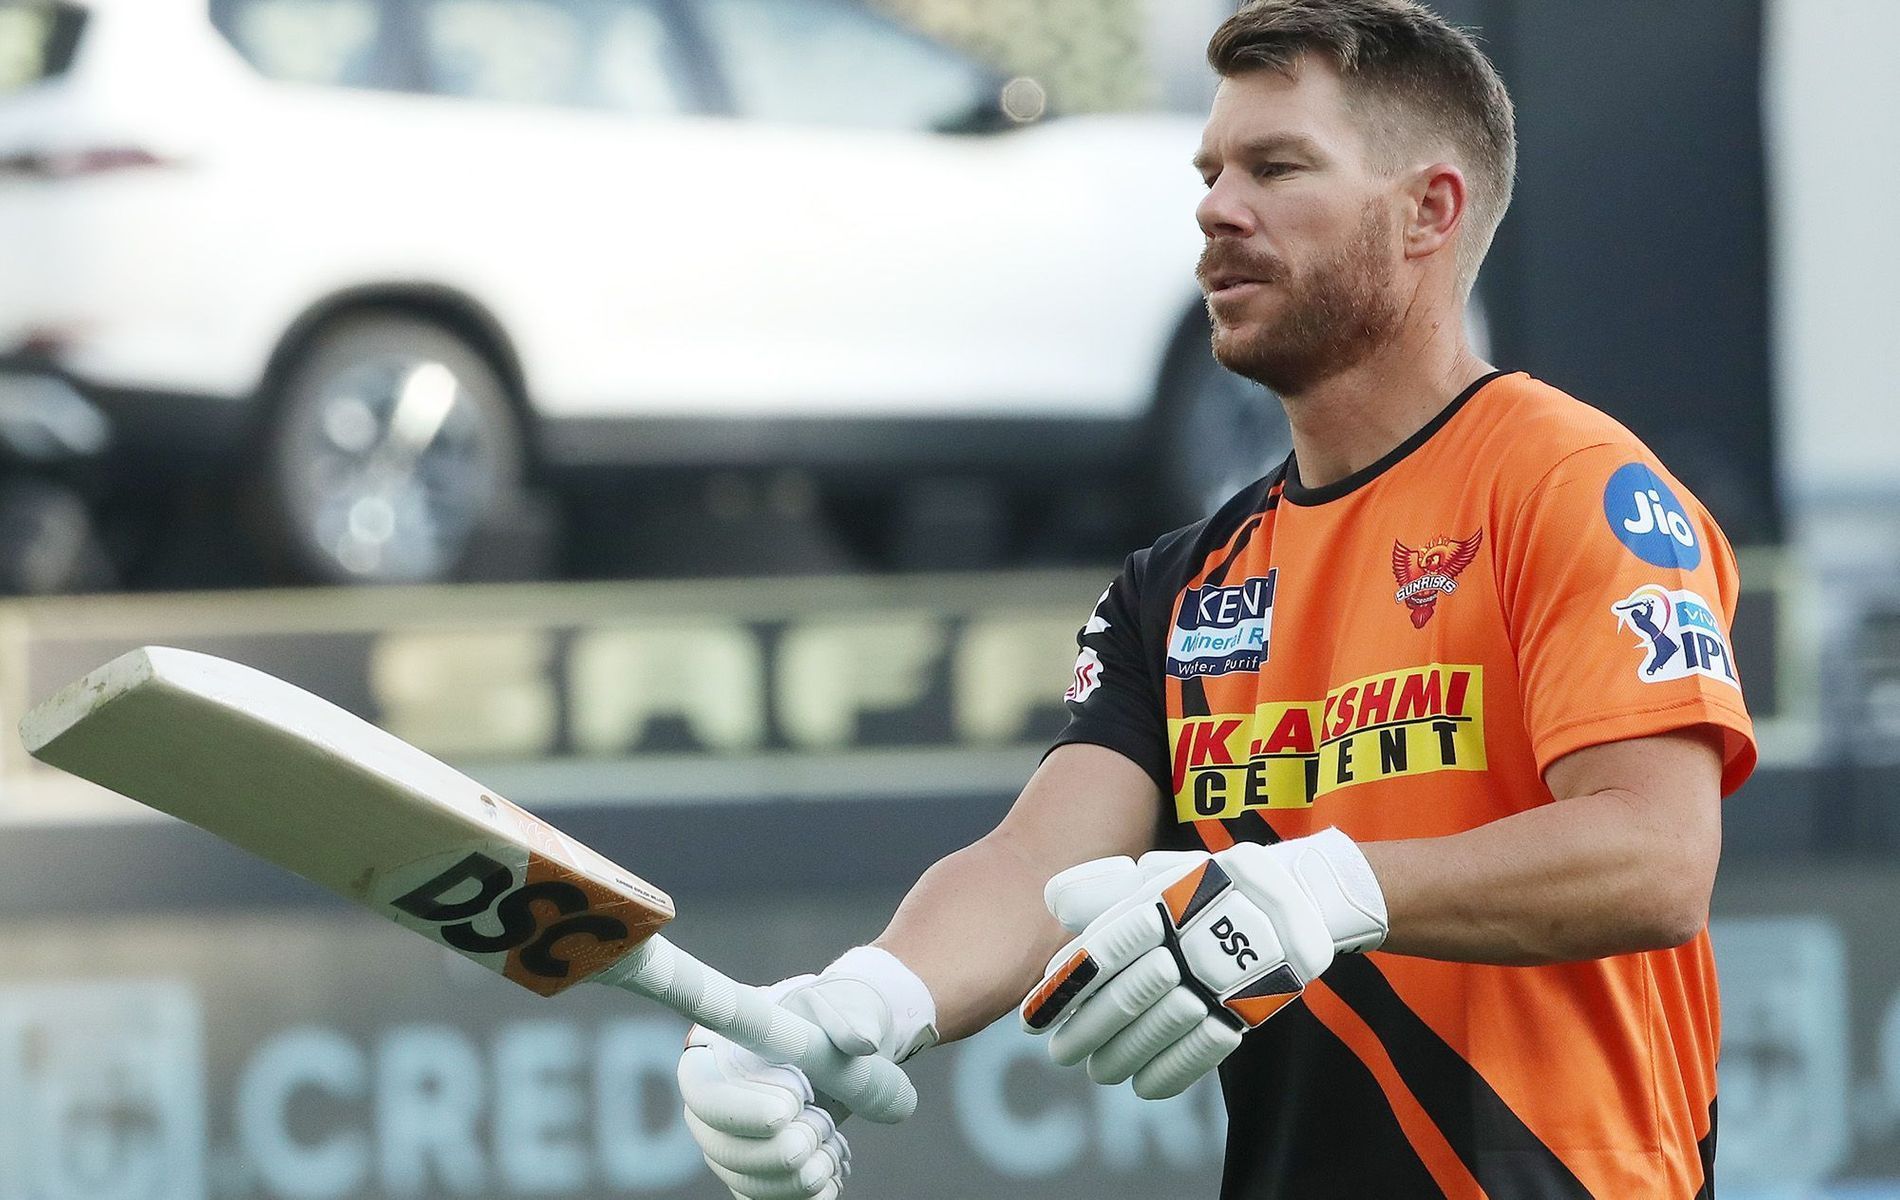 David Warner has likely played his last match for SunRisers Hyderabad.